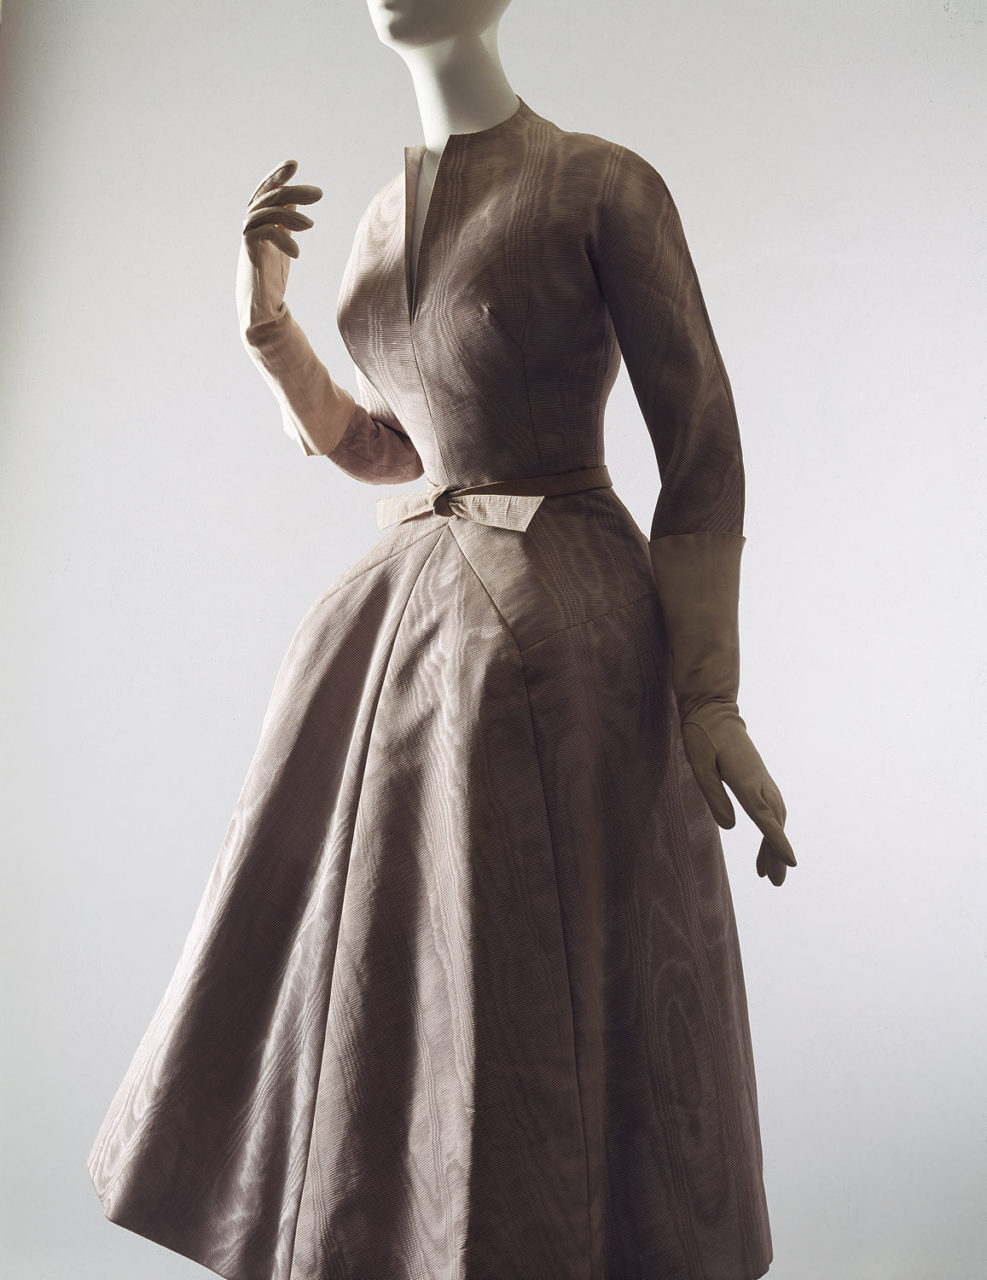 Christian Dior: The New Look  Fashion and Decor: A Cultural History